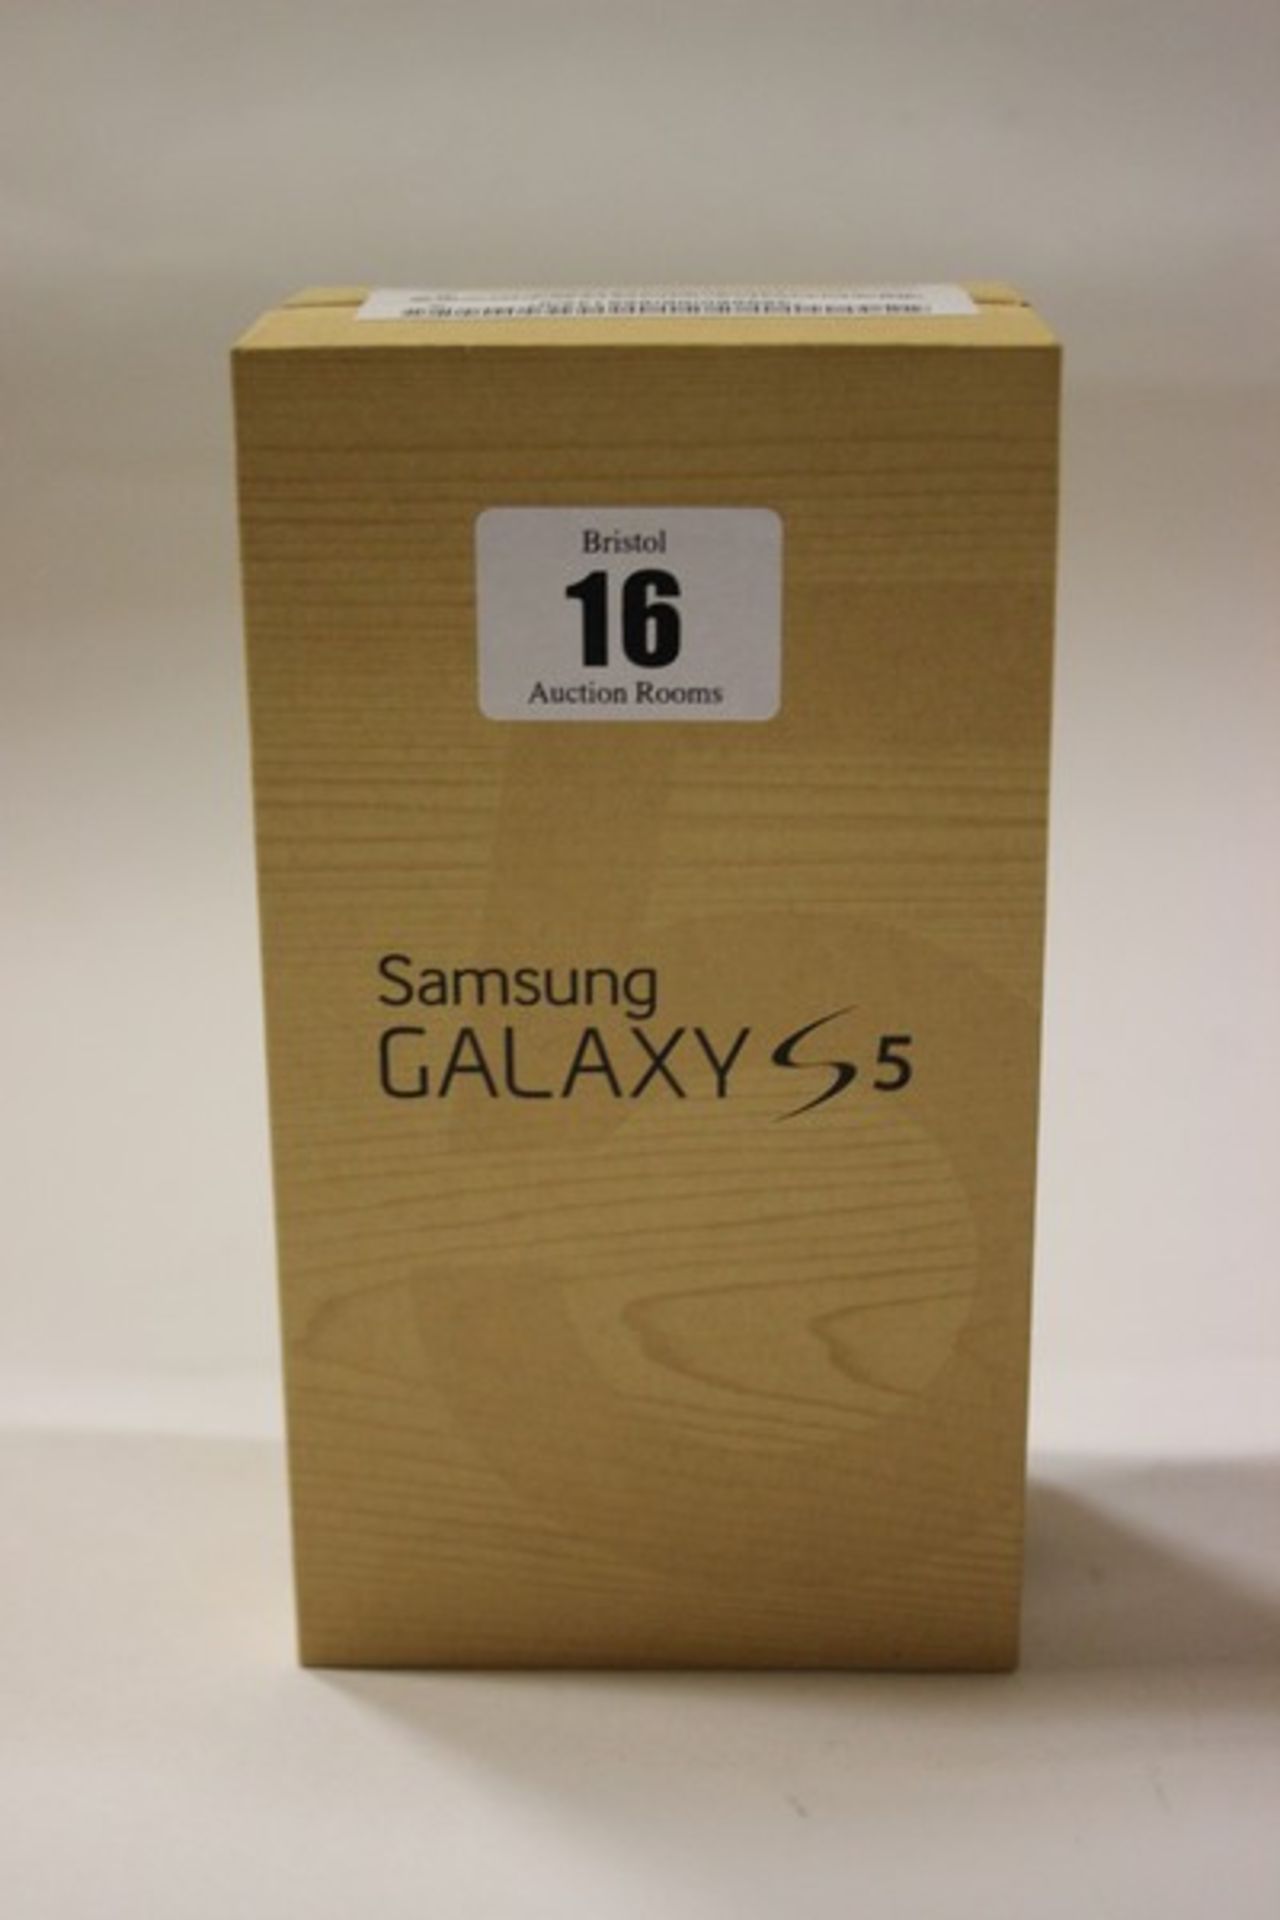 A Samsung Galaxy S5 charcoal black model: SM-G900FD imei: 359660066581420 (Boxed and sealed